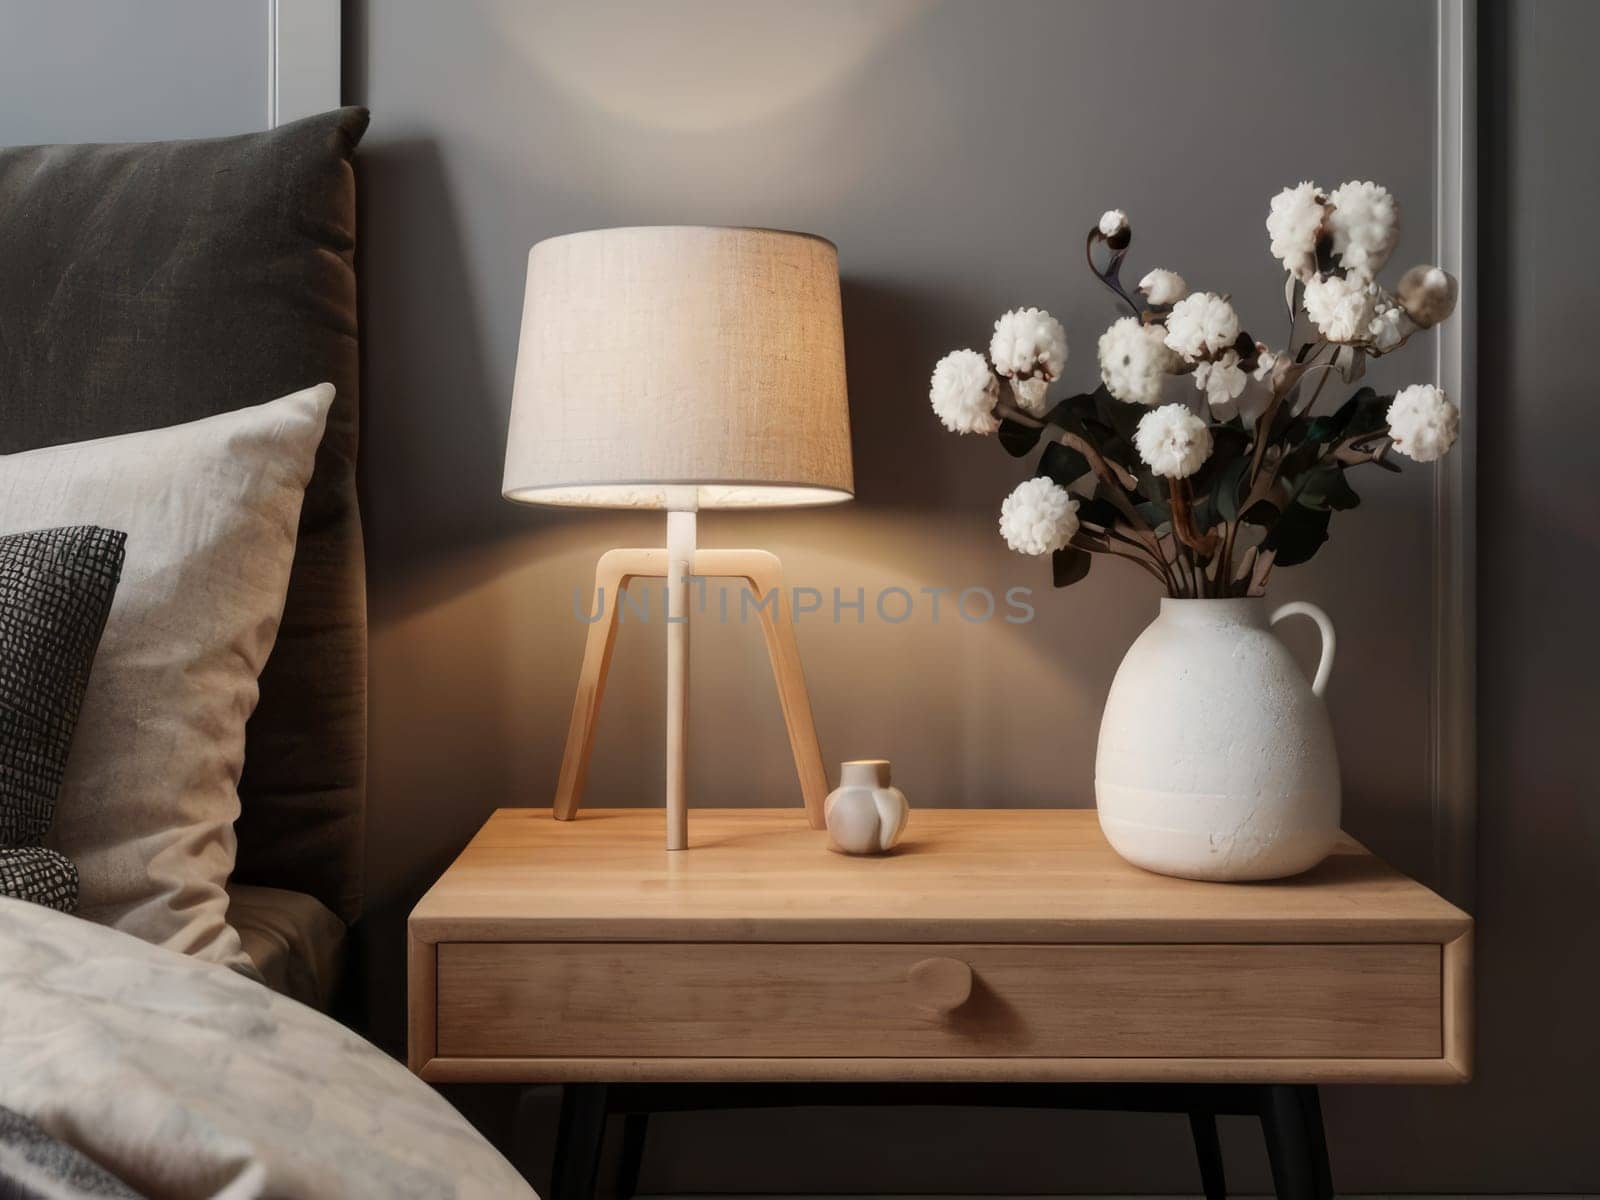 Elegant nightstand featuring a lamp and a vase of flowers, illuminating the tranquil bedroom. Scandinavian-inspired home decor